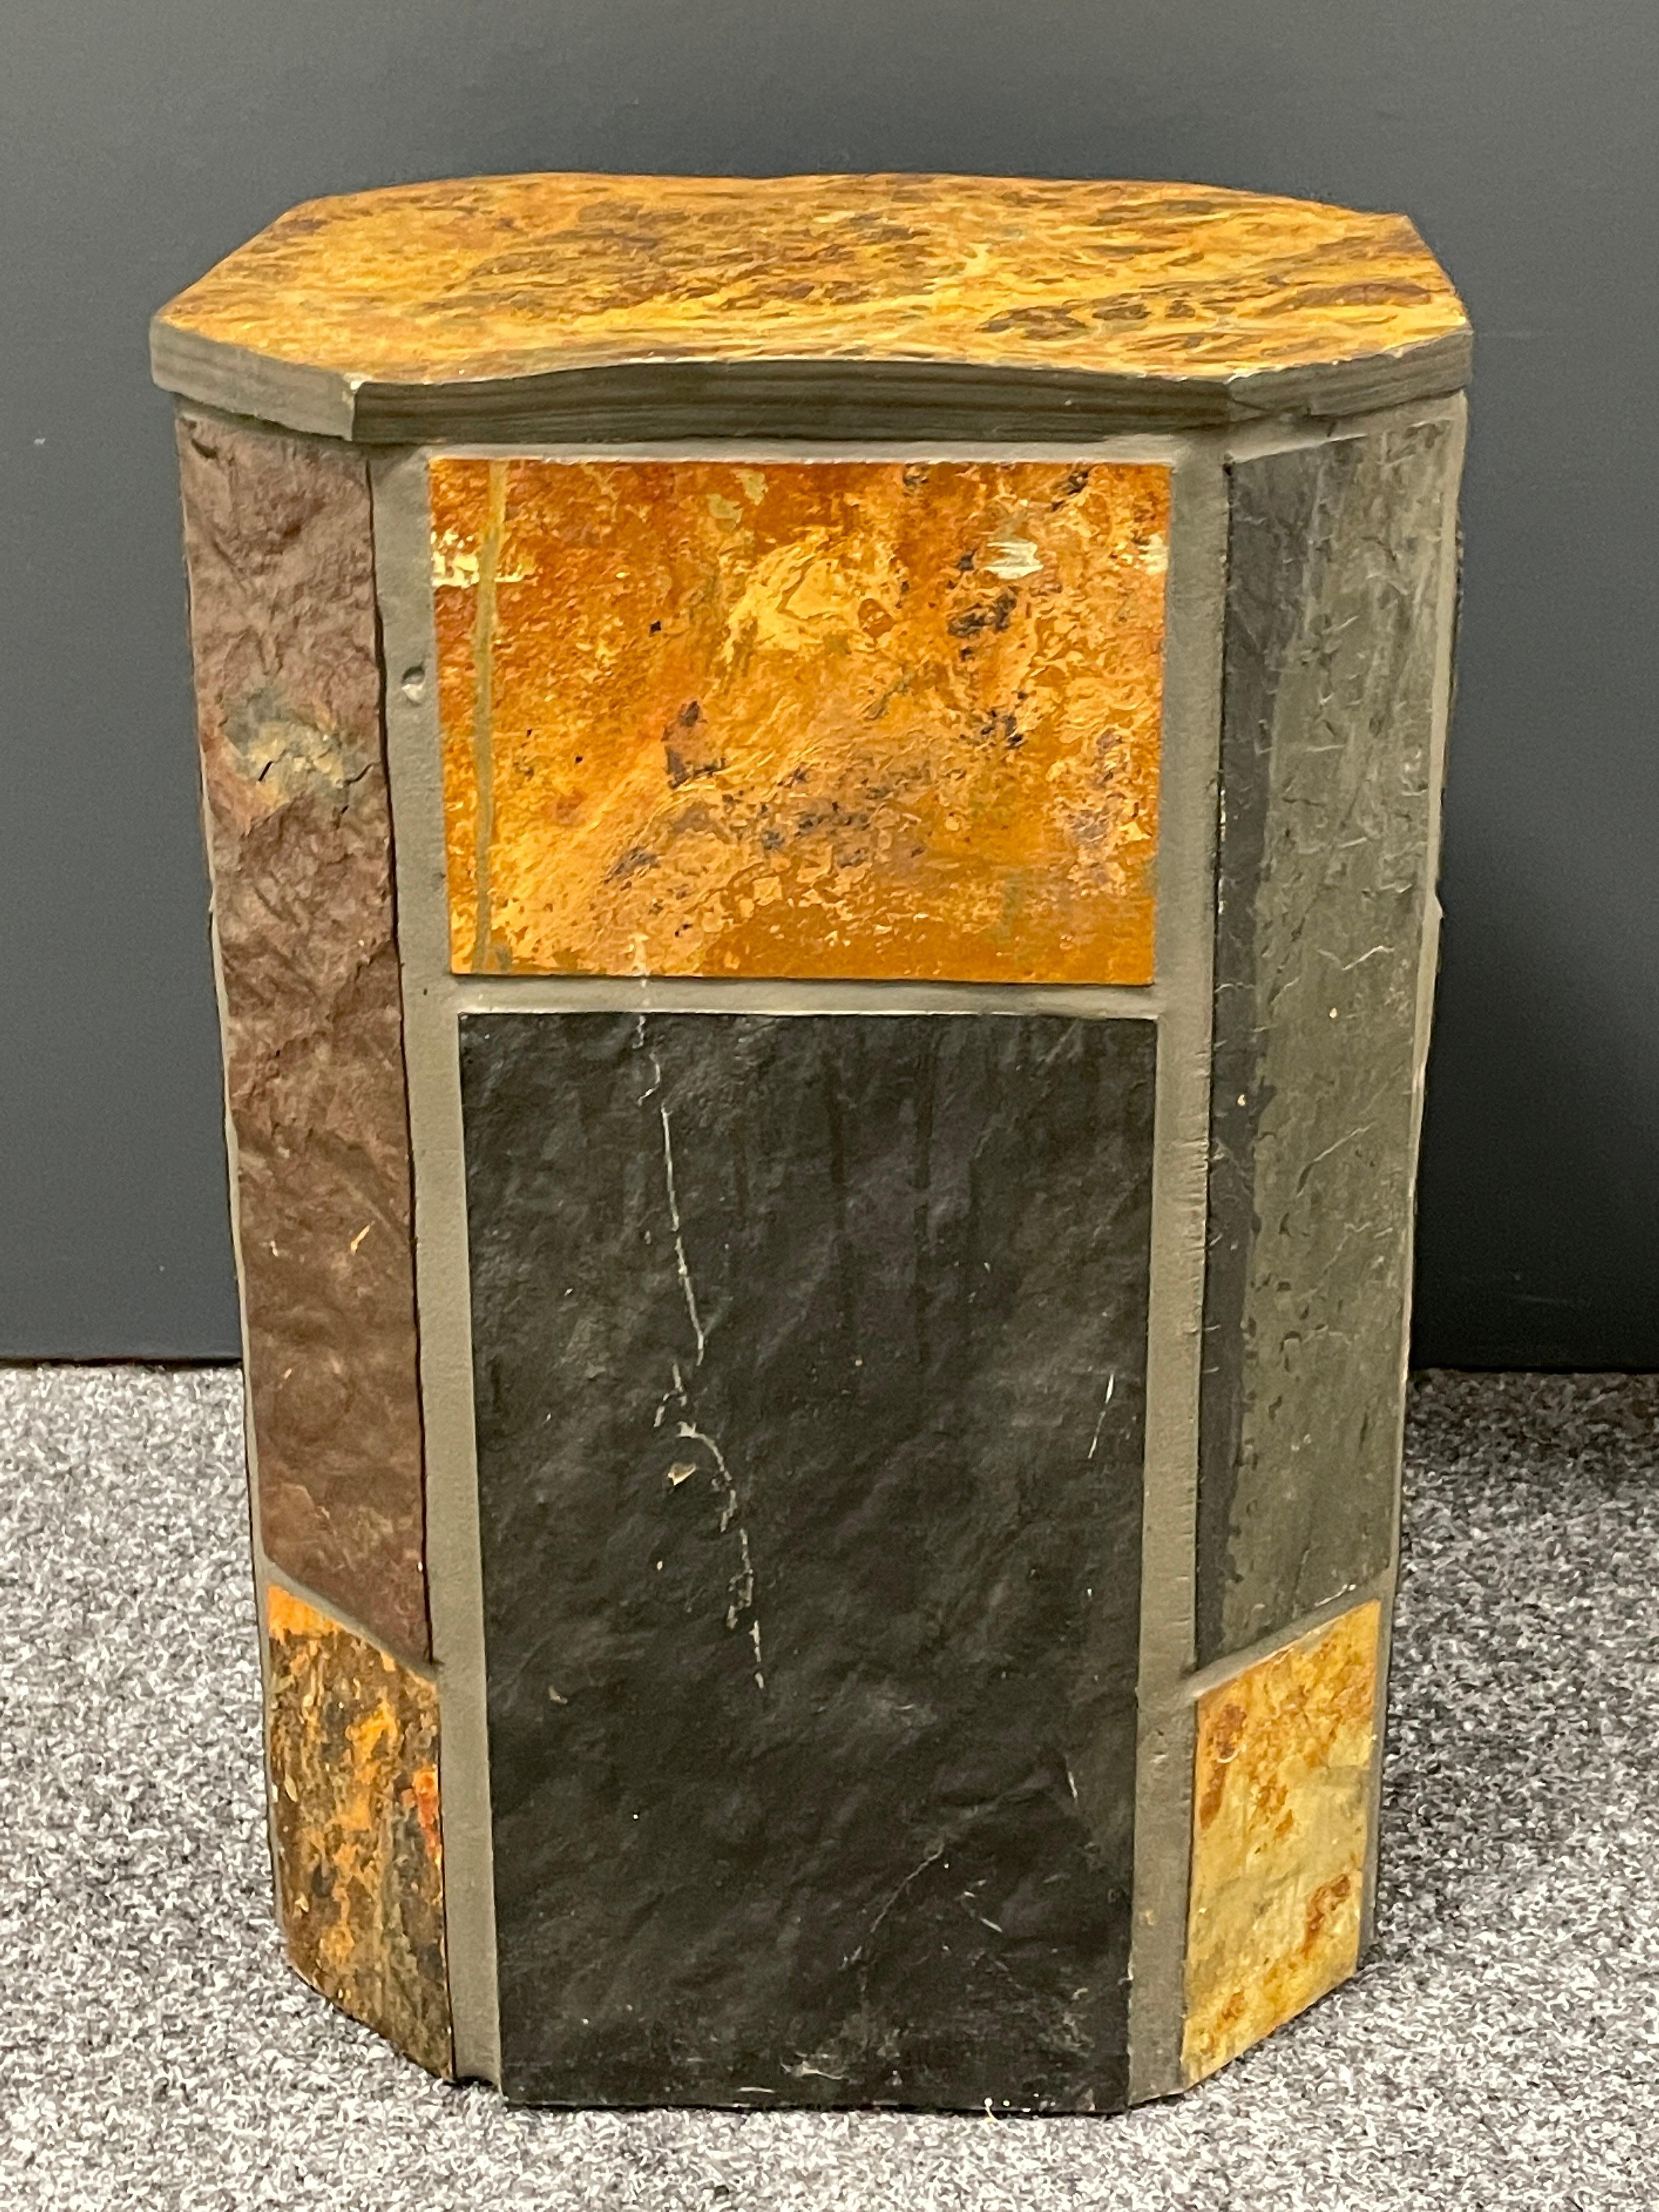 German Heavy Brutalist Style Pedestal, Slate, Wood and Concrete, 1960s Dutch For Sale